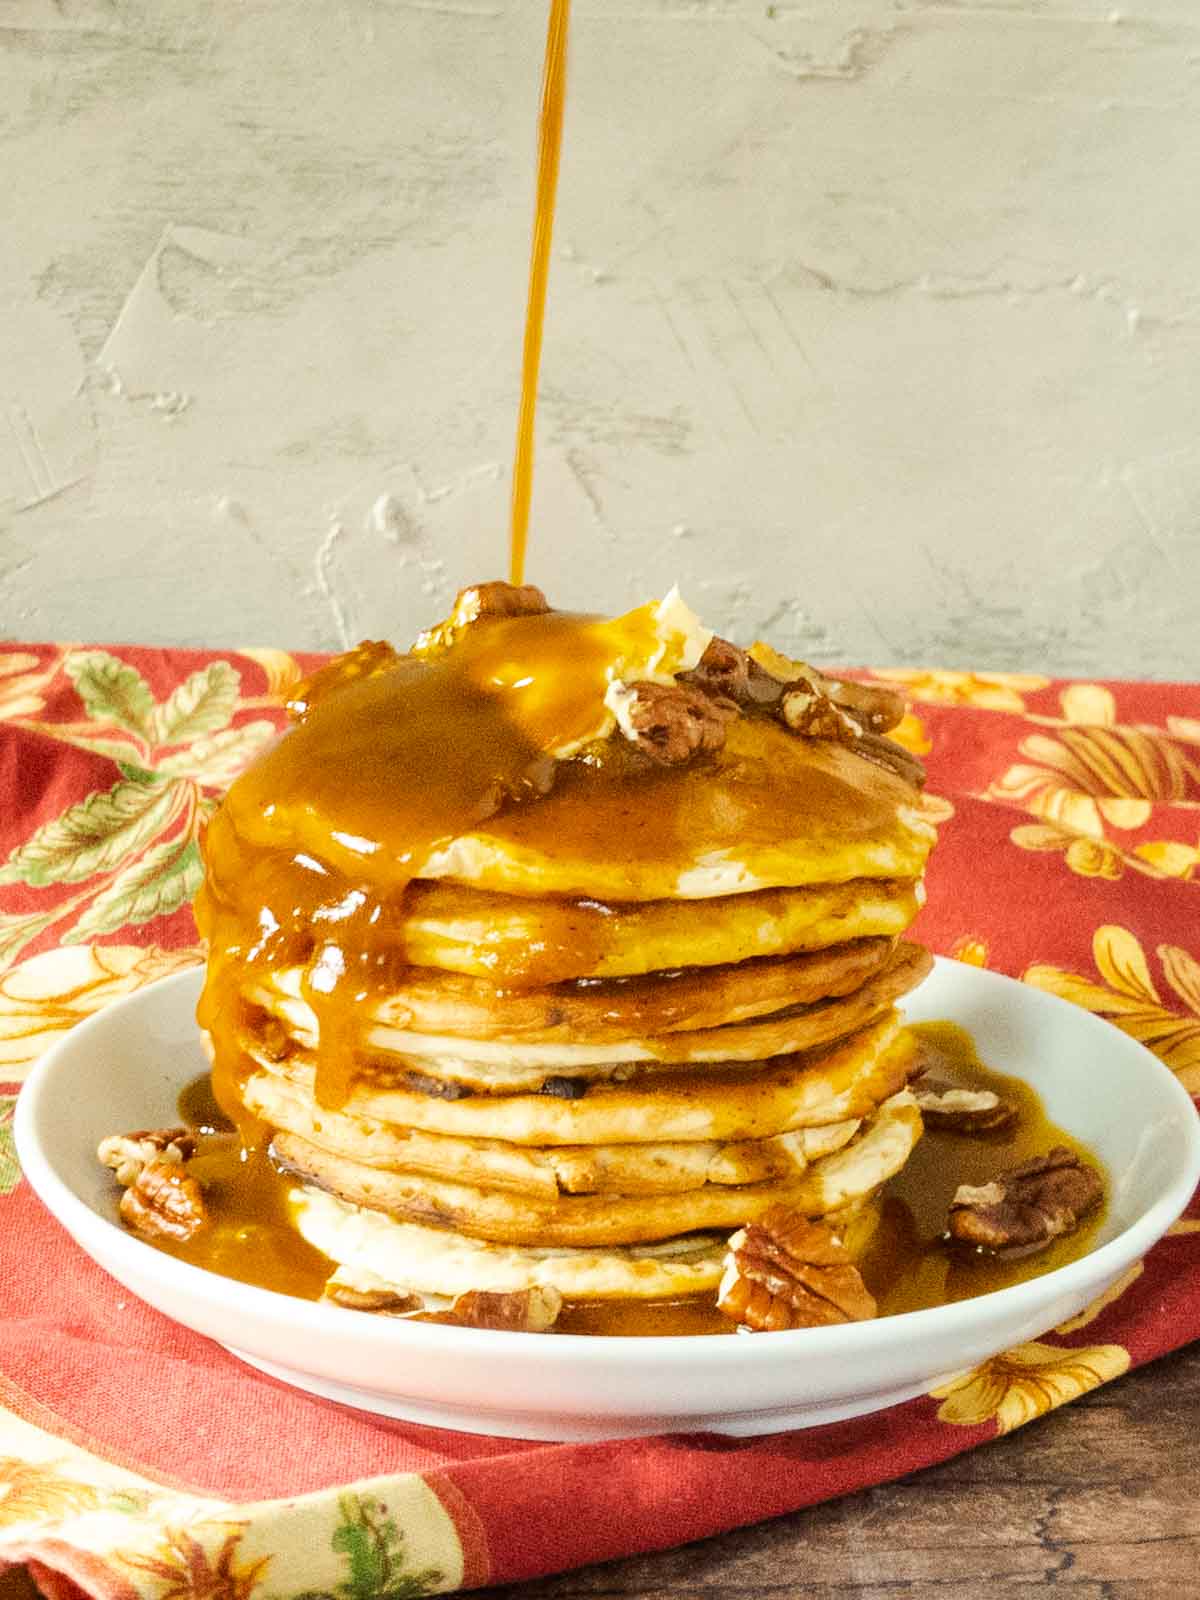 syrup being poured over a stack of pumpkin pancakes